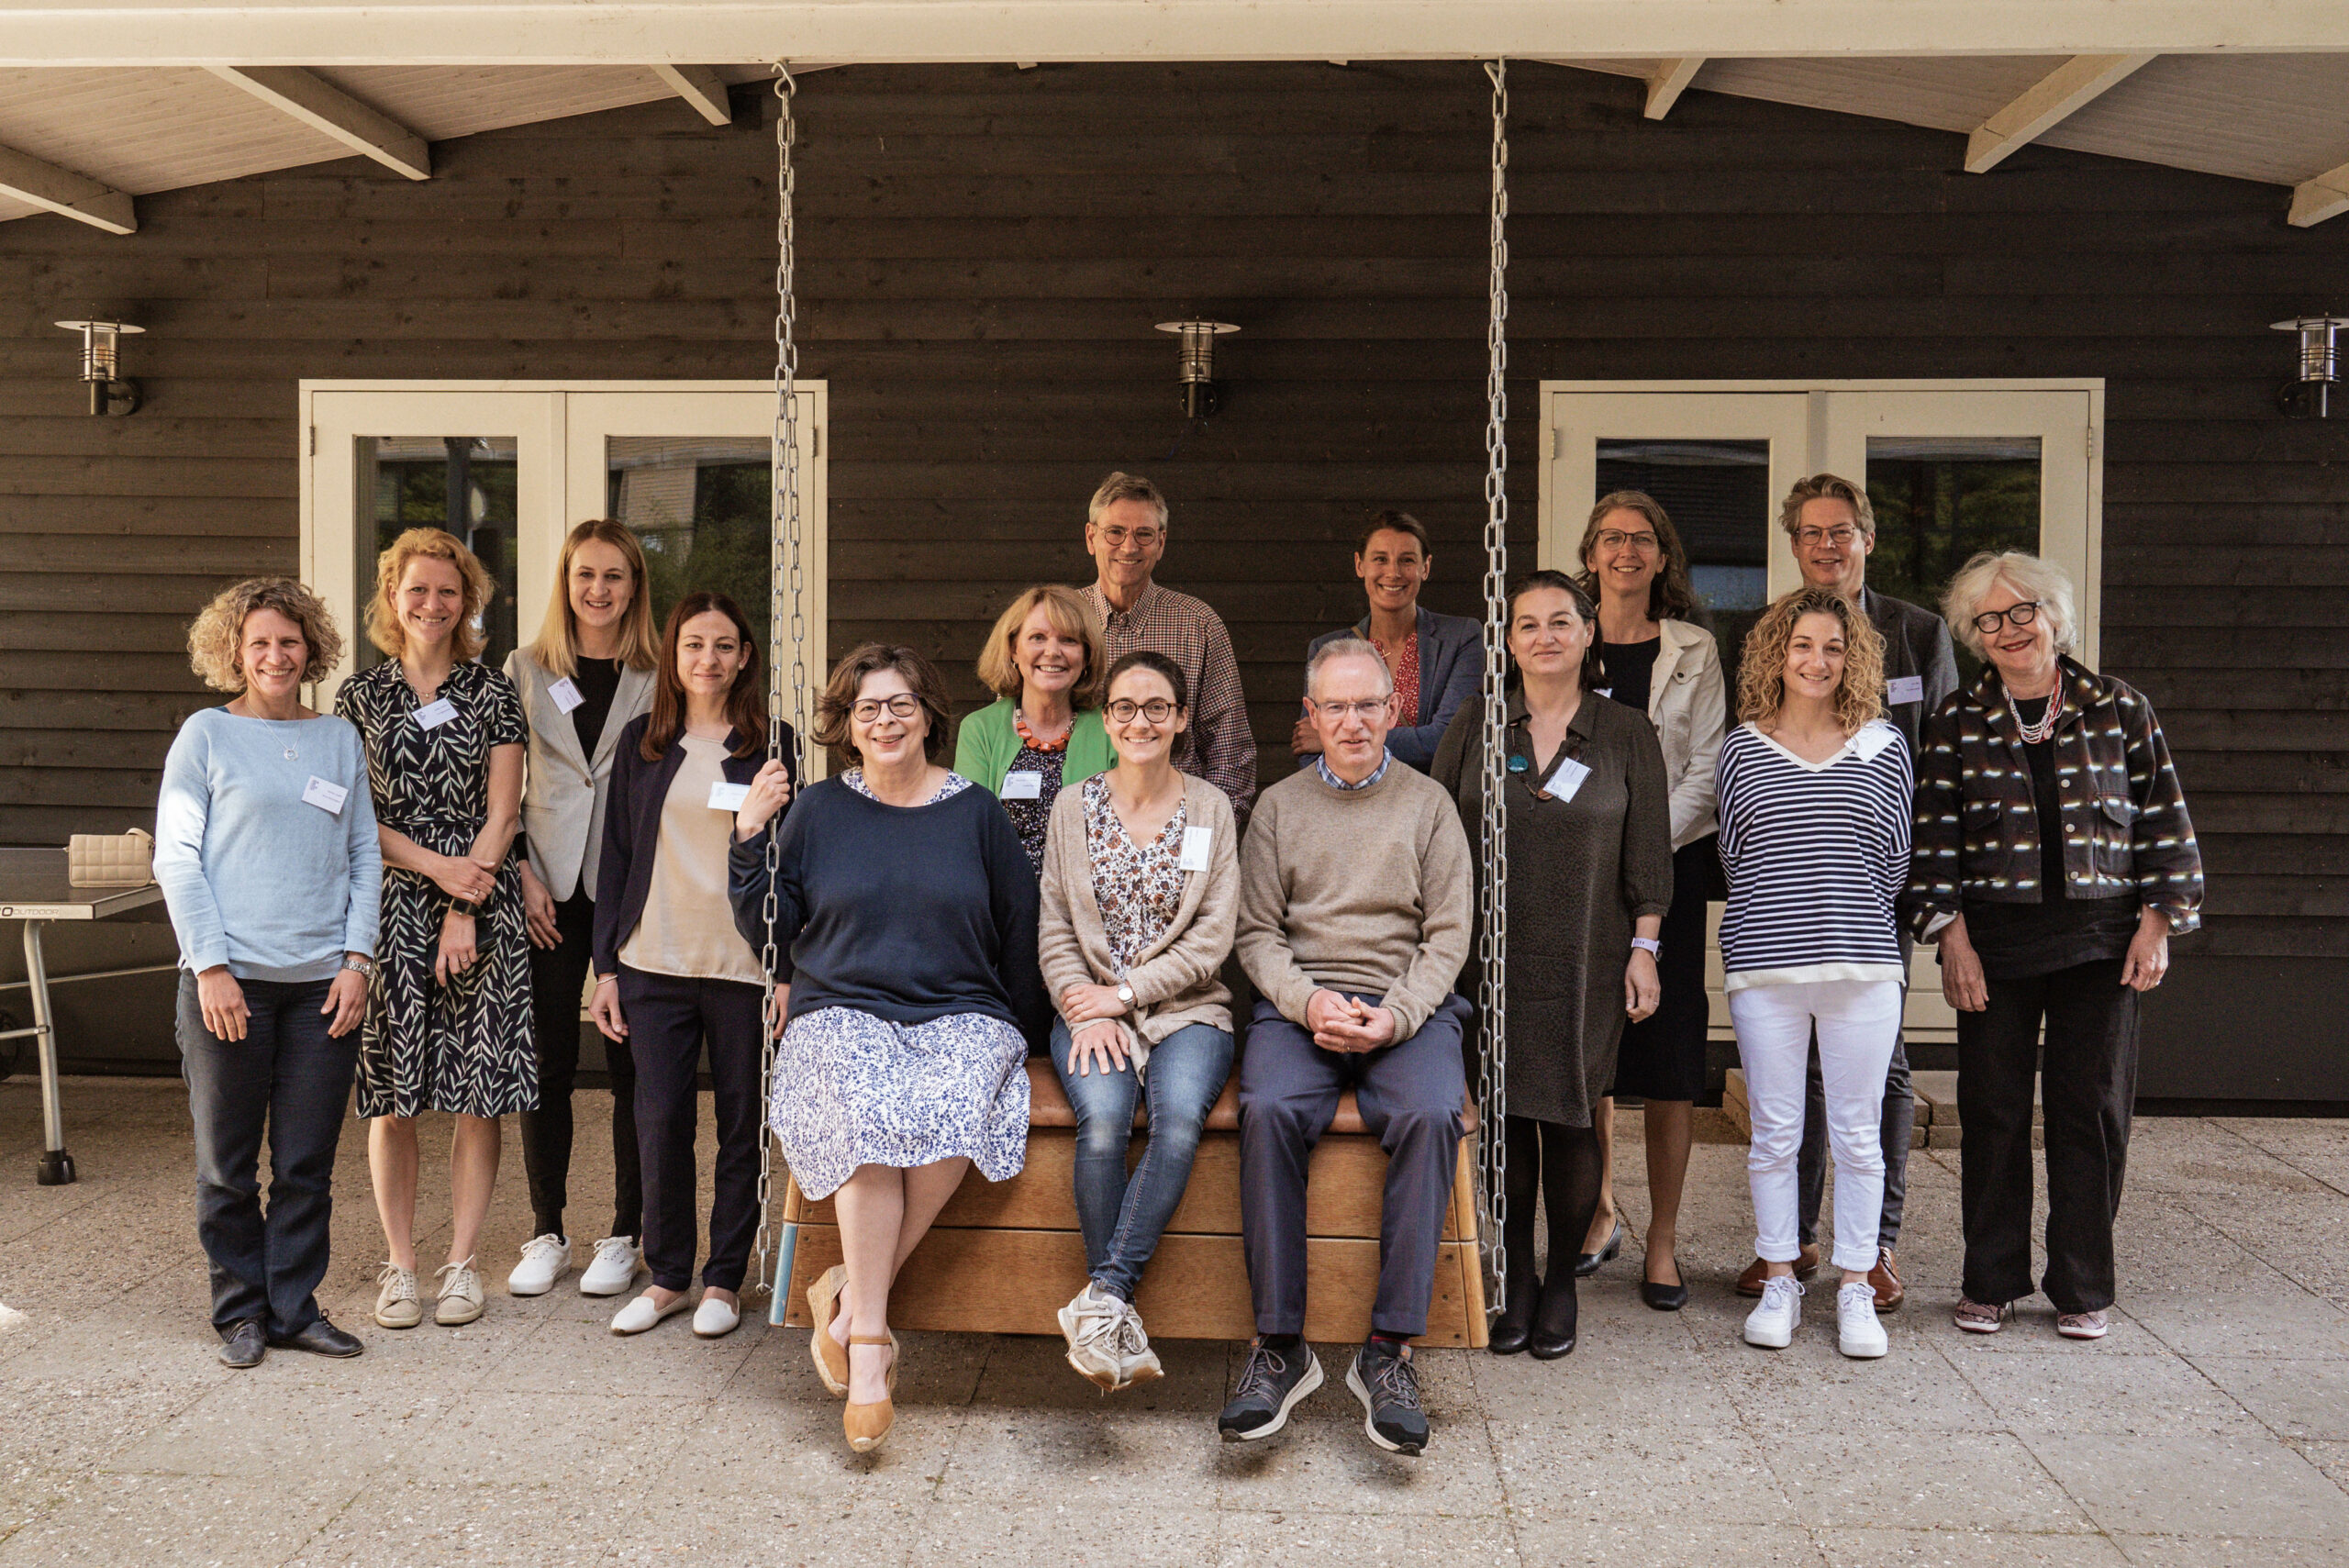 ENMC Workshop #263 on females with dystrophinopathy